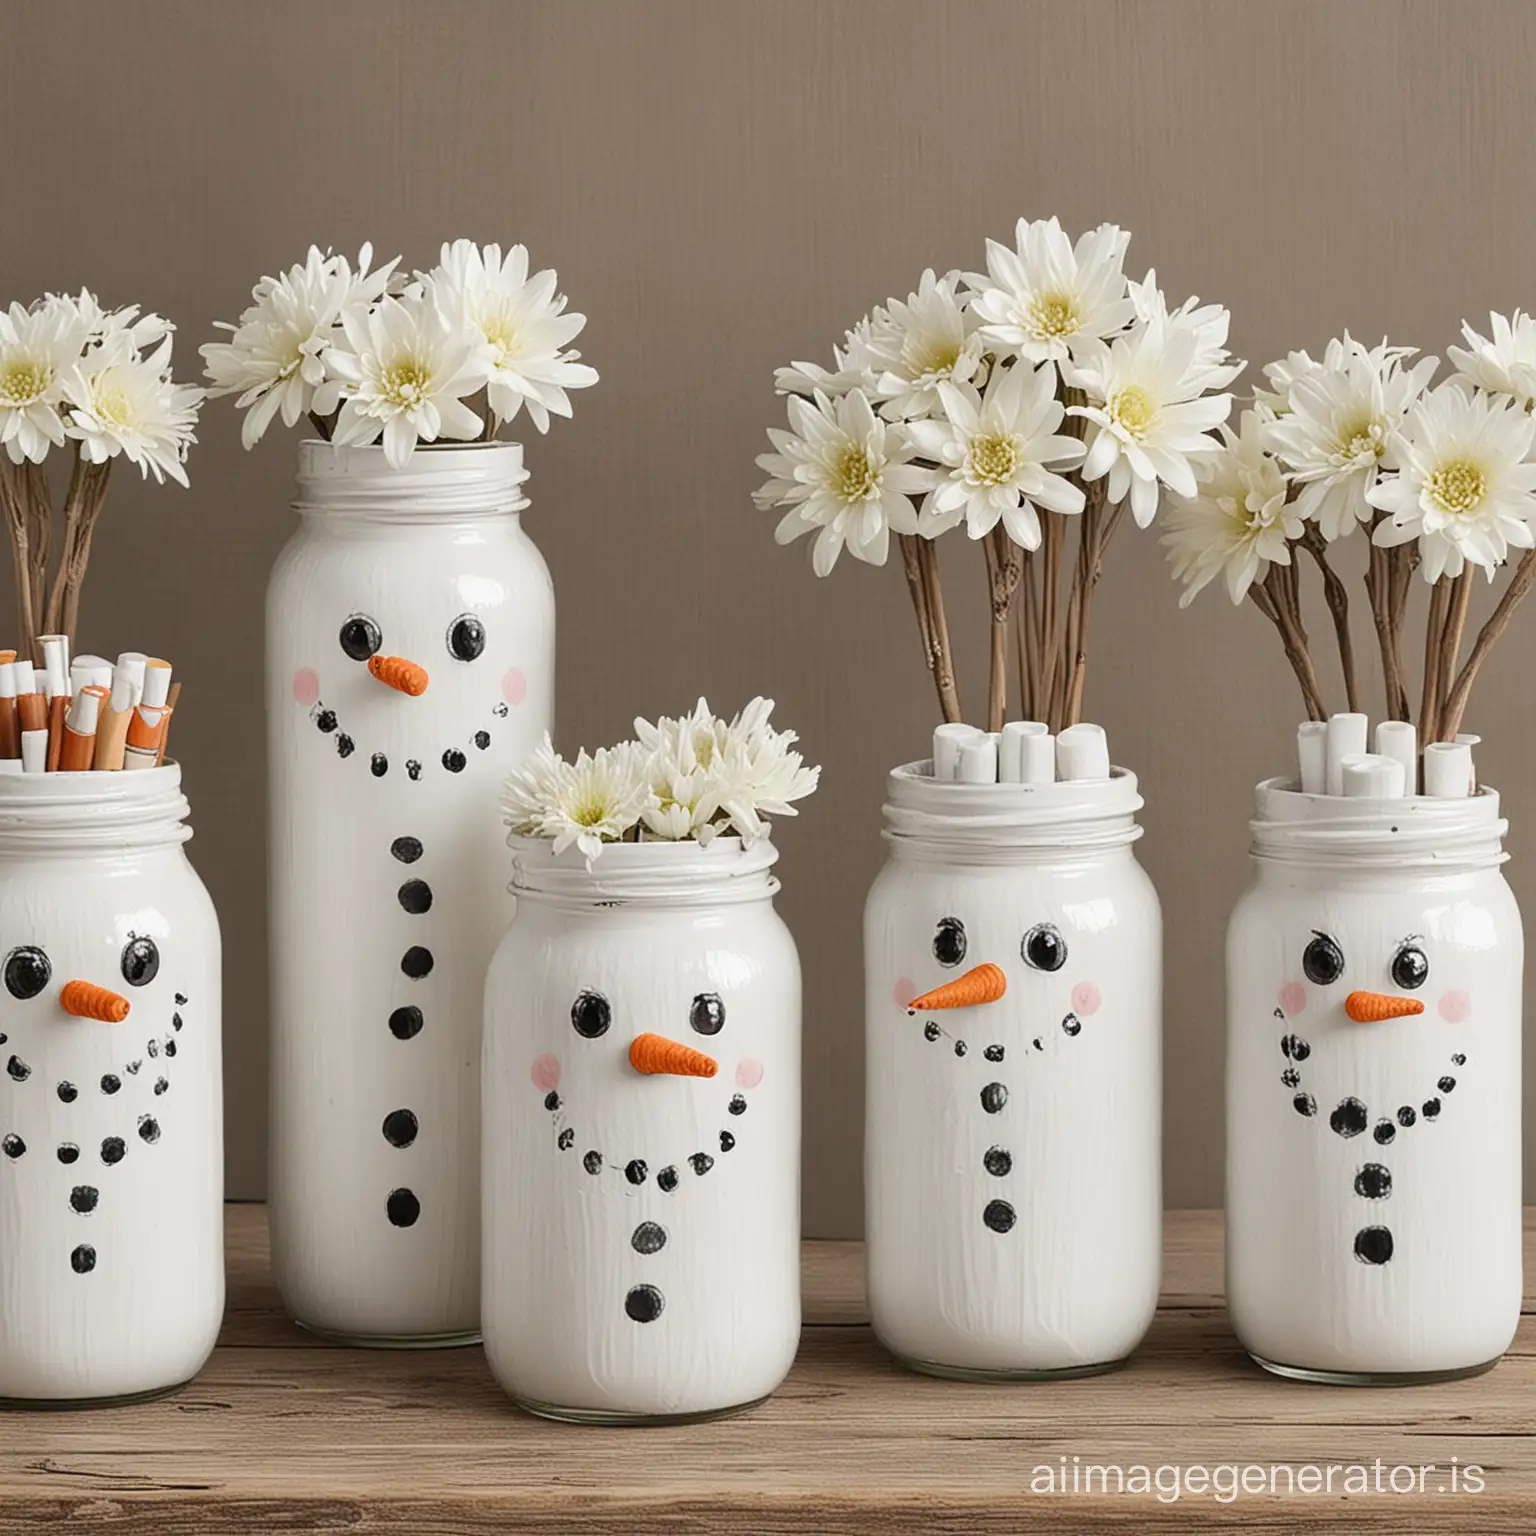 various repurposed jars painted white, with crafting supplies to make the jars decorated as snowmen; fill the jars with various white flowers